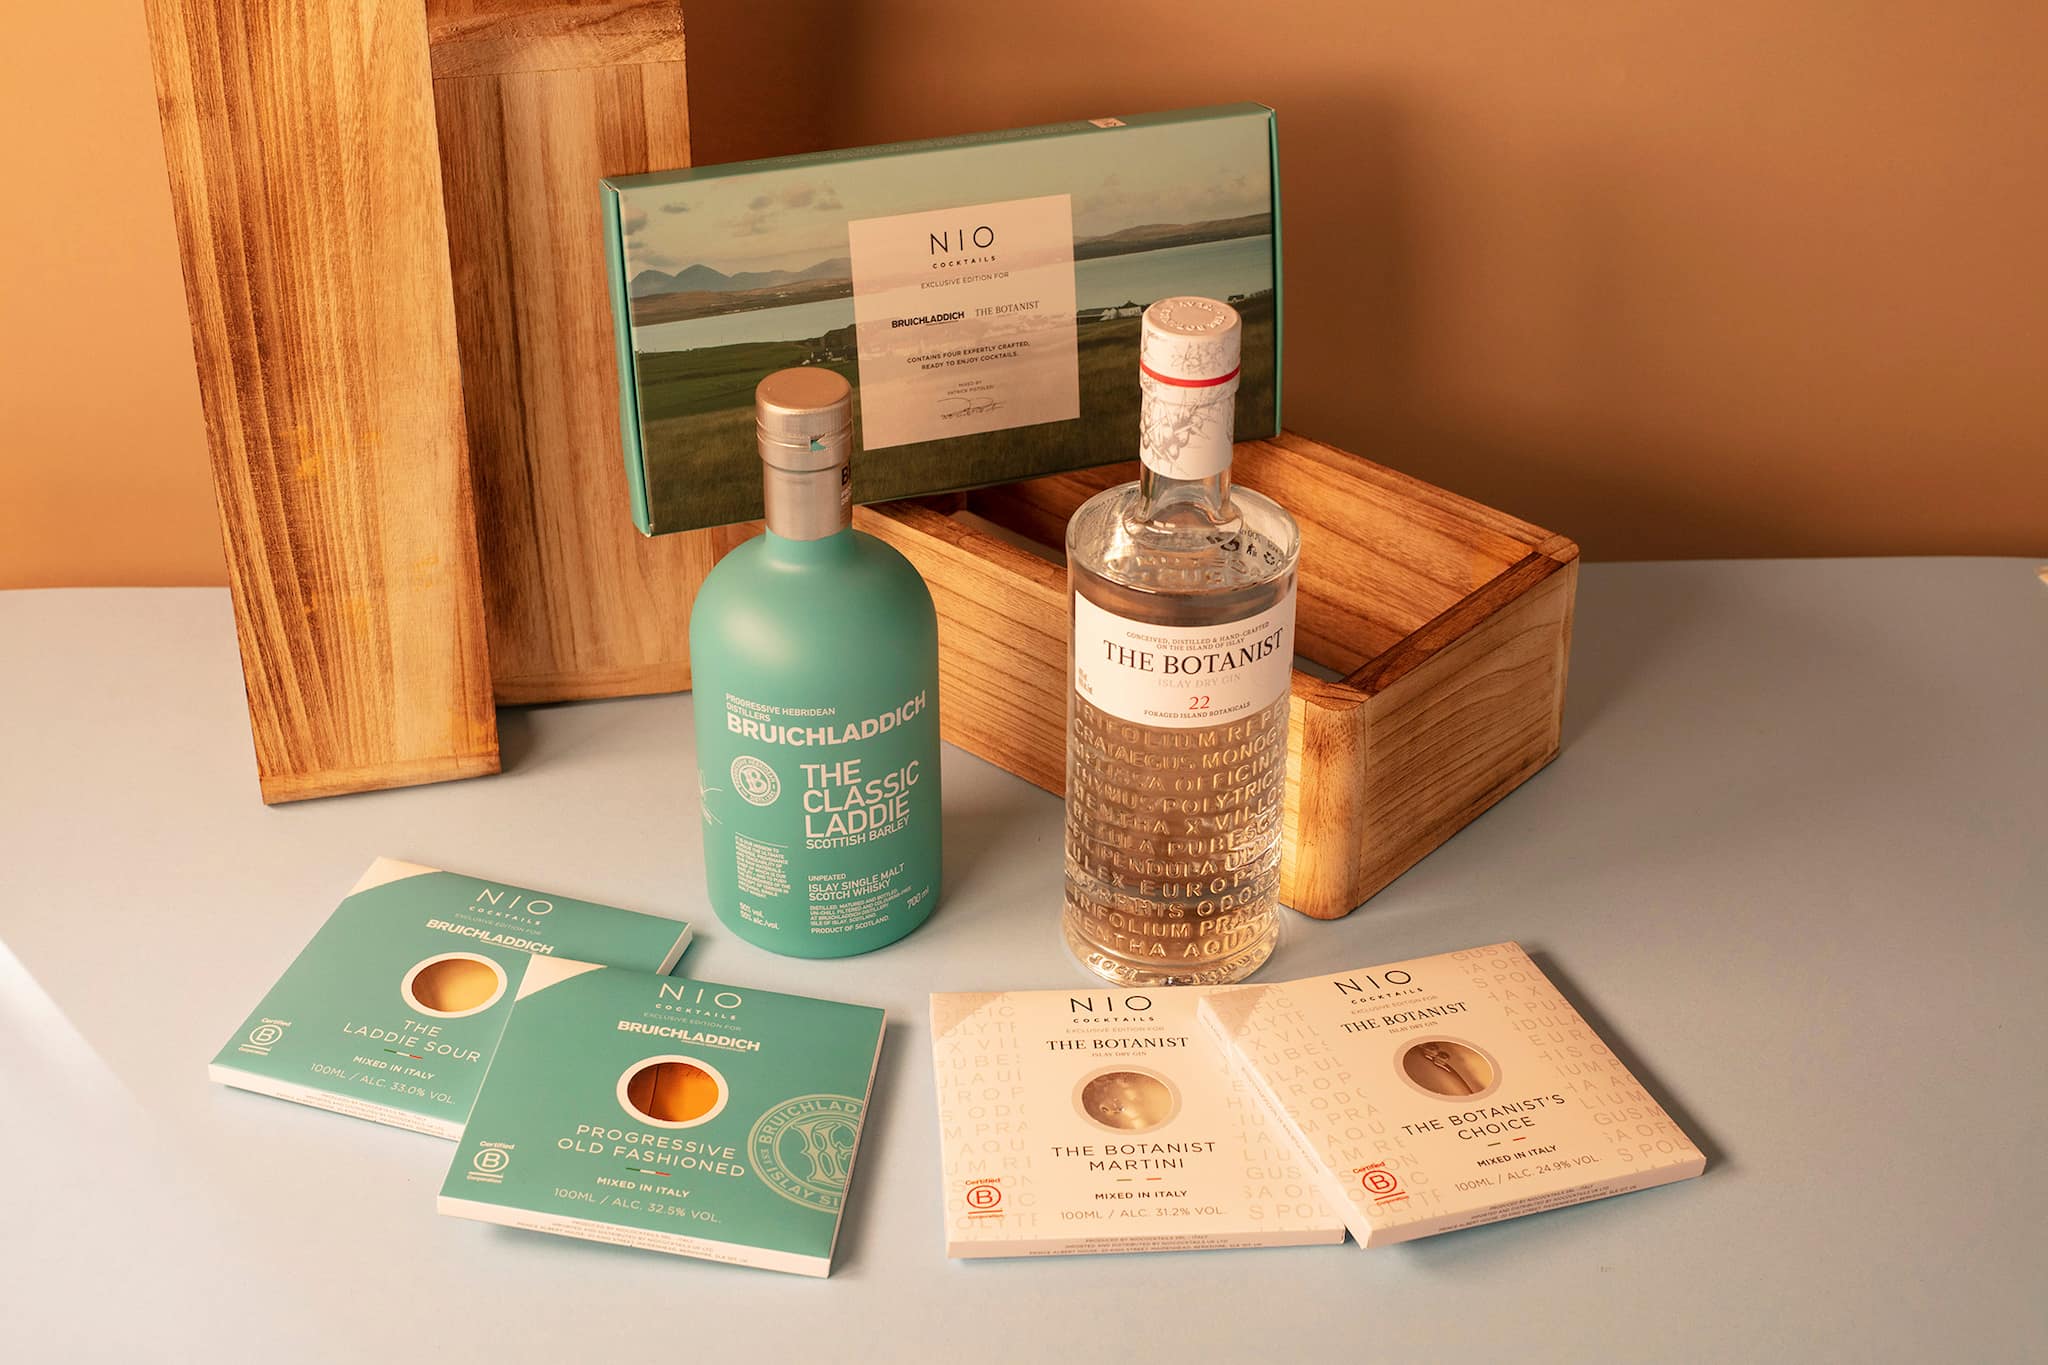 Introducing Our Exclusive Bruichladdich and The Botanist Cocktail Box